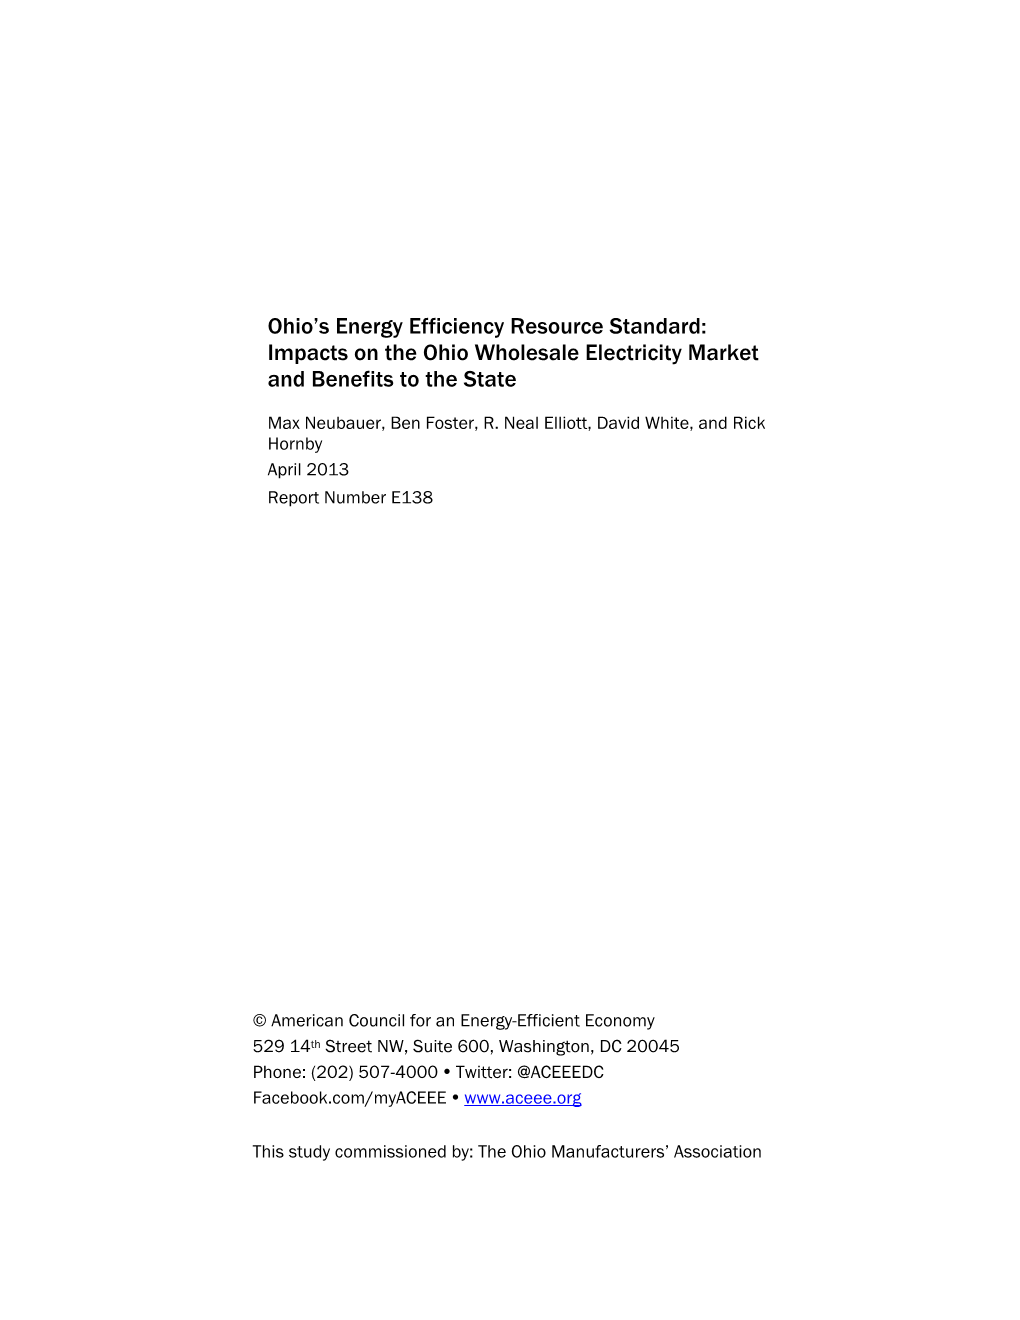 Energy Efficiency Resource Standard: Impacts on the Ohio Wholesale Electricity Market and Benefits to the State